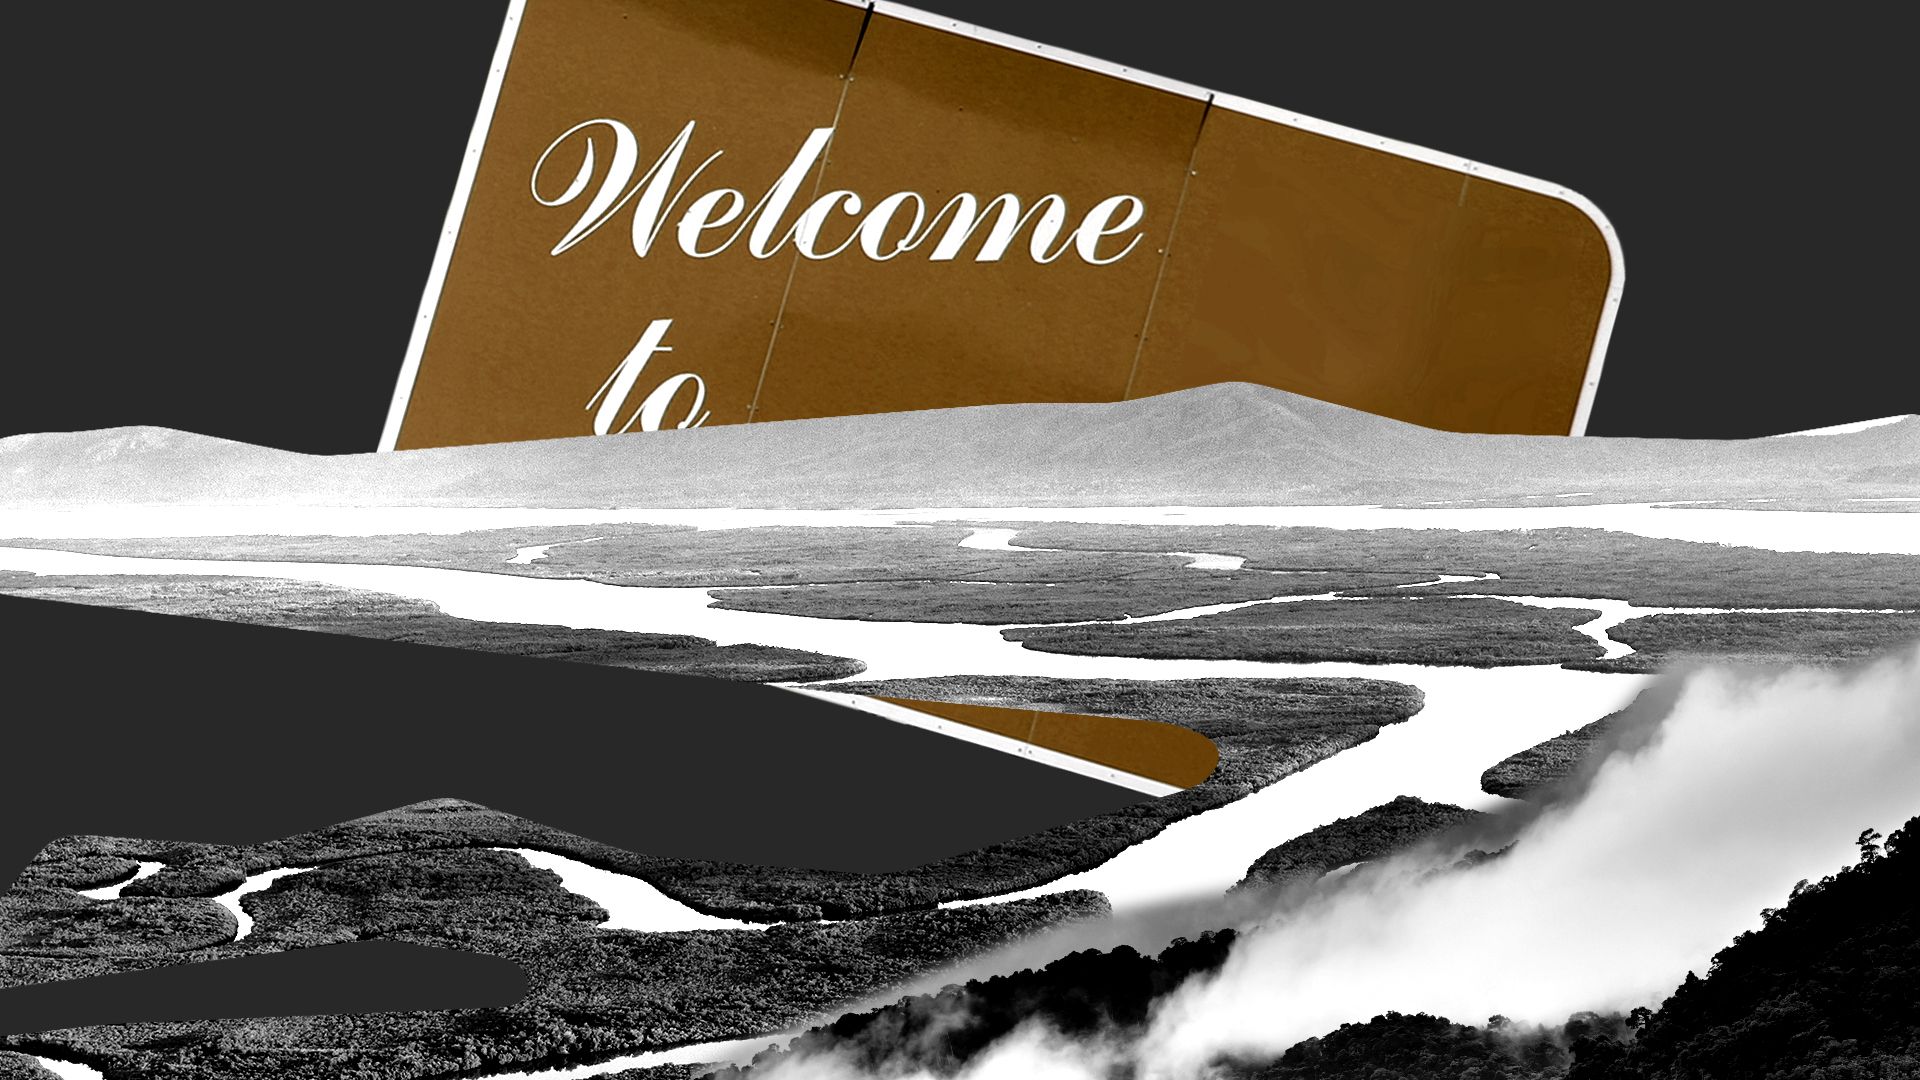 Illustration collage of a welcome sign amidst images of rivers and mountains.